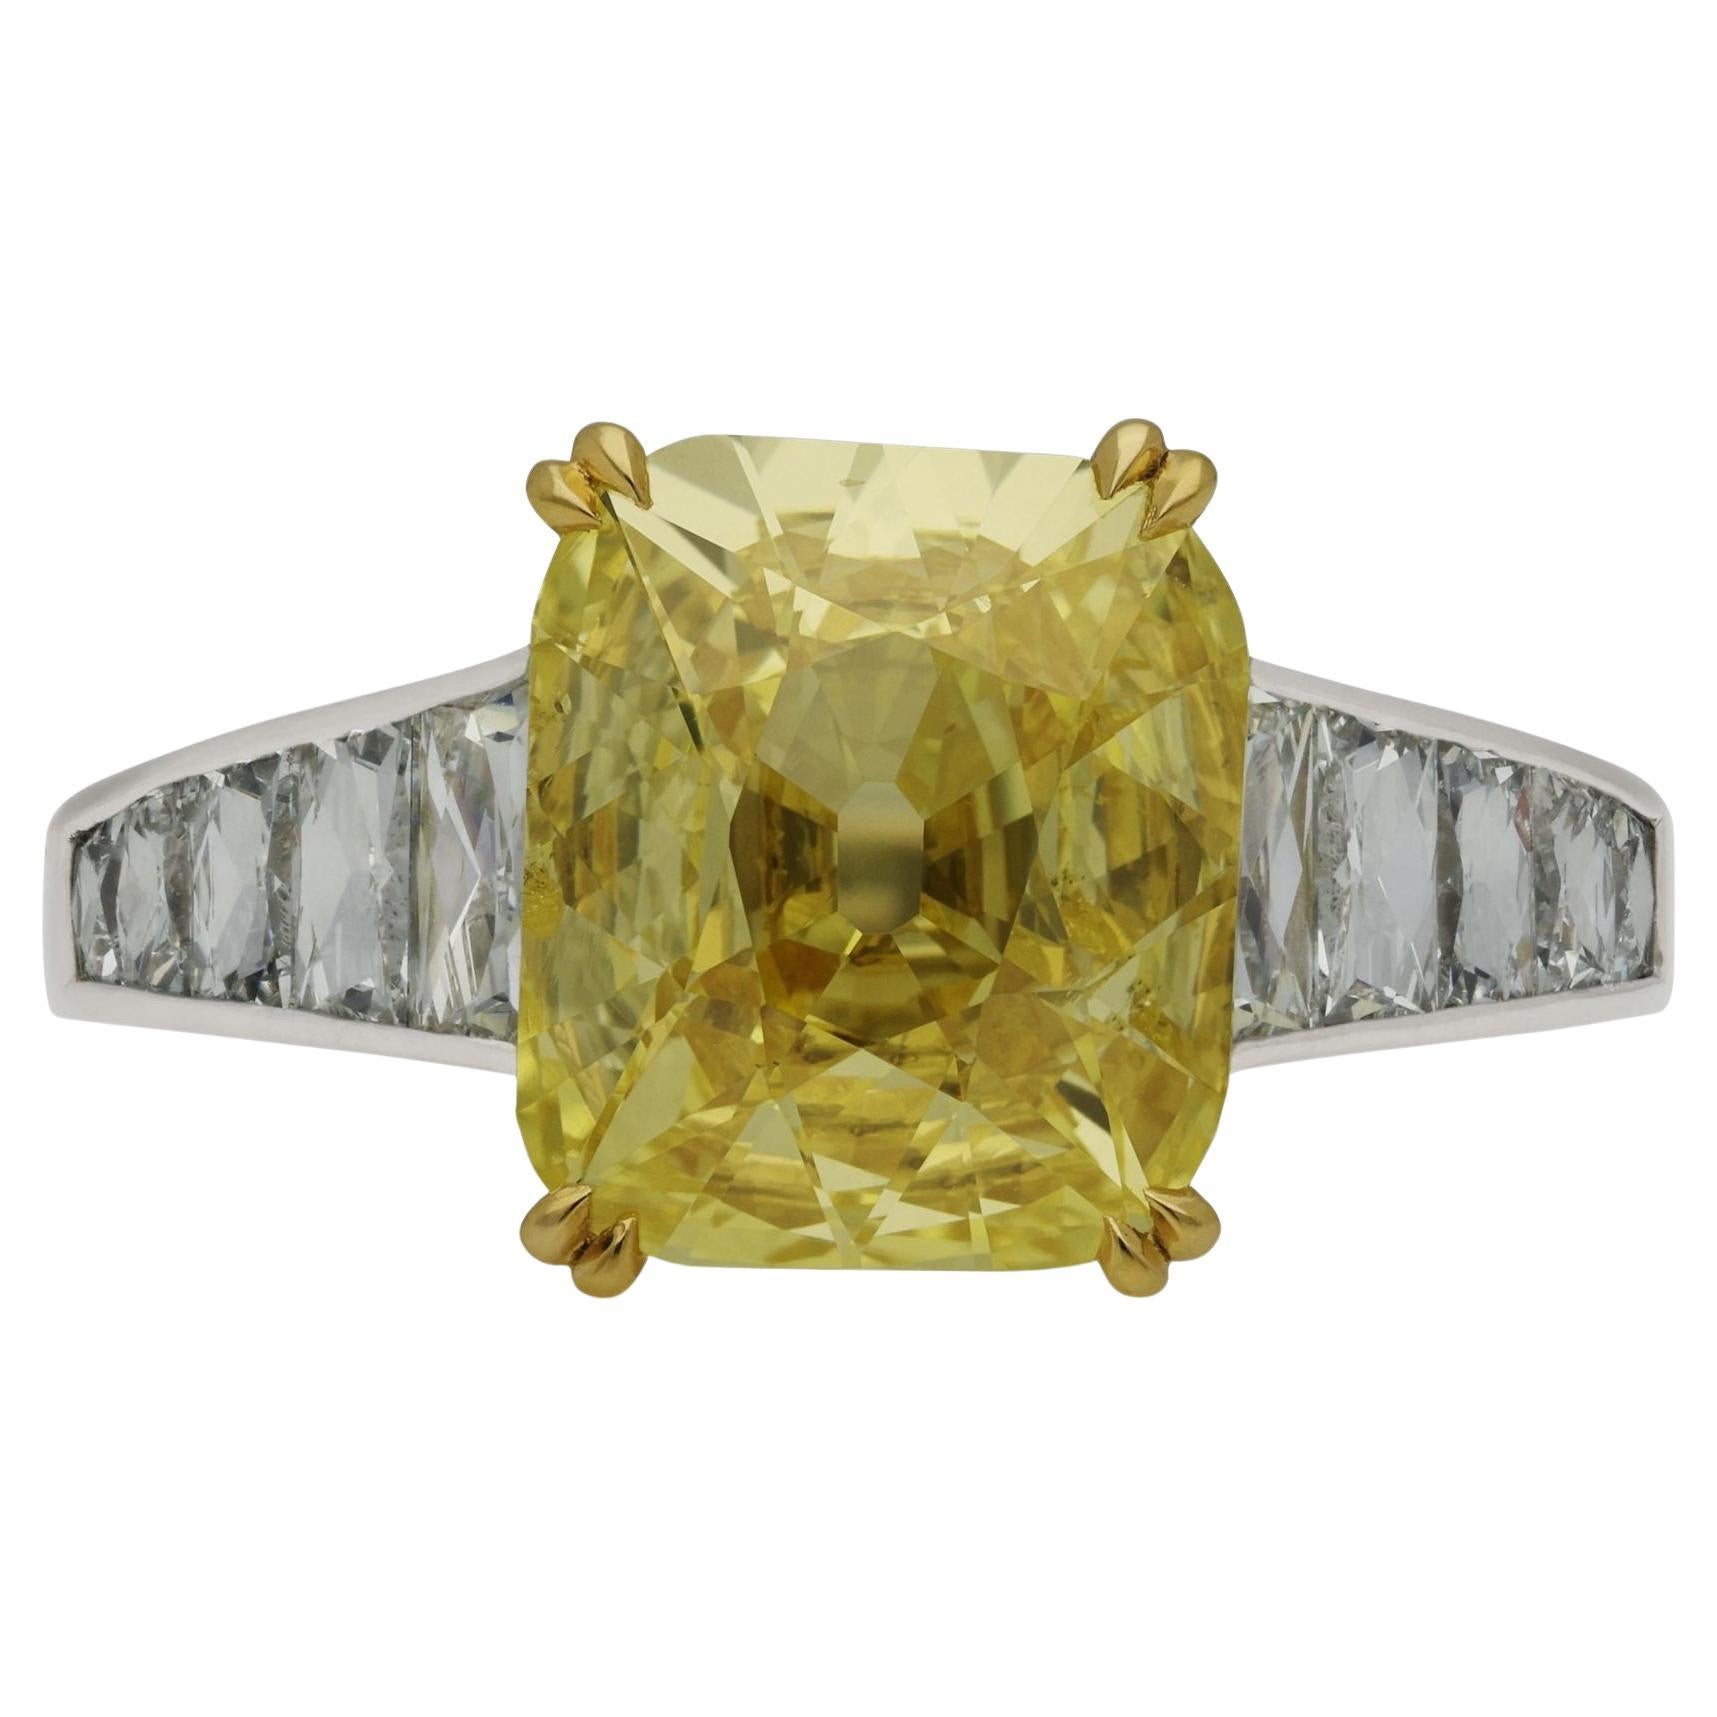 Hancocks 2.56ct Fancy Intense Yellow Old Cushion Cut Diamond and French Cut Ring For Sale